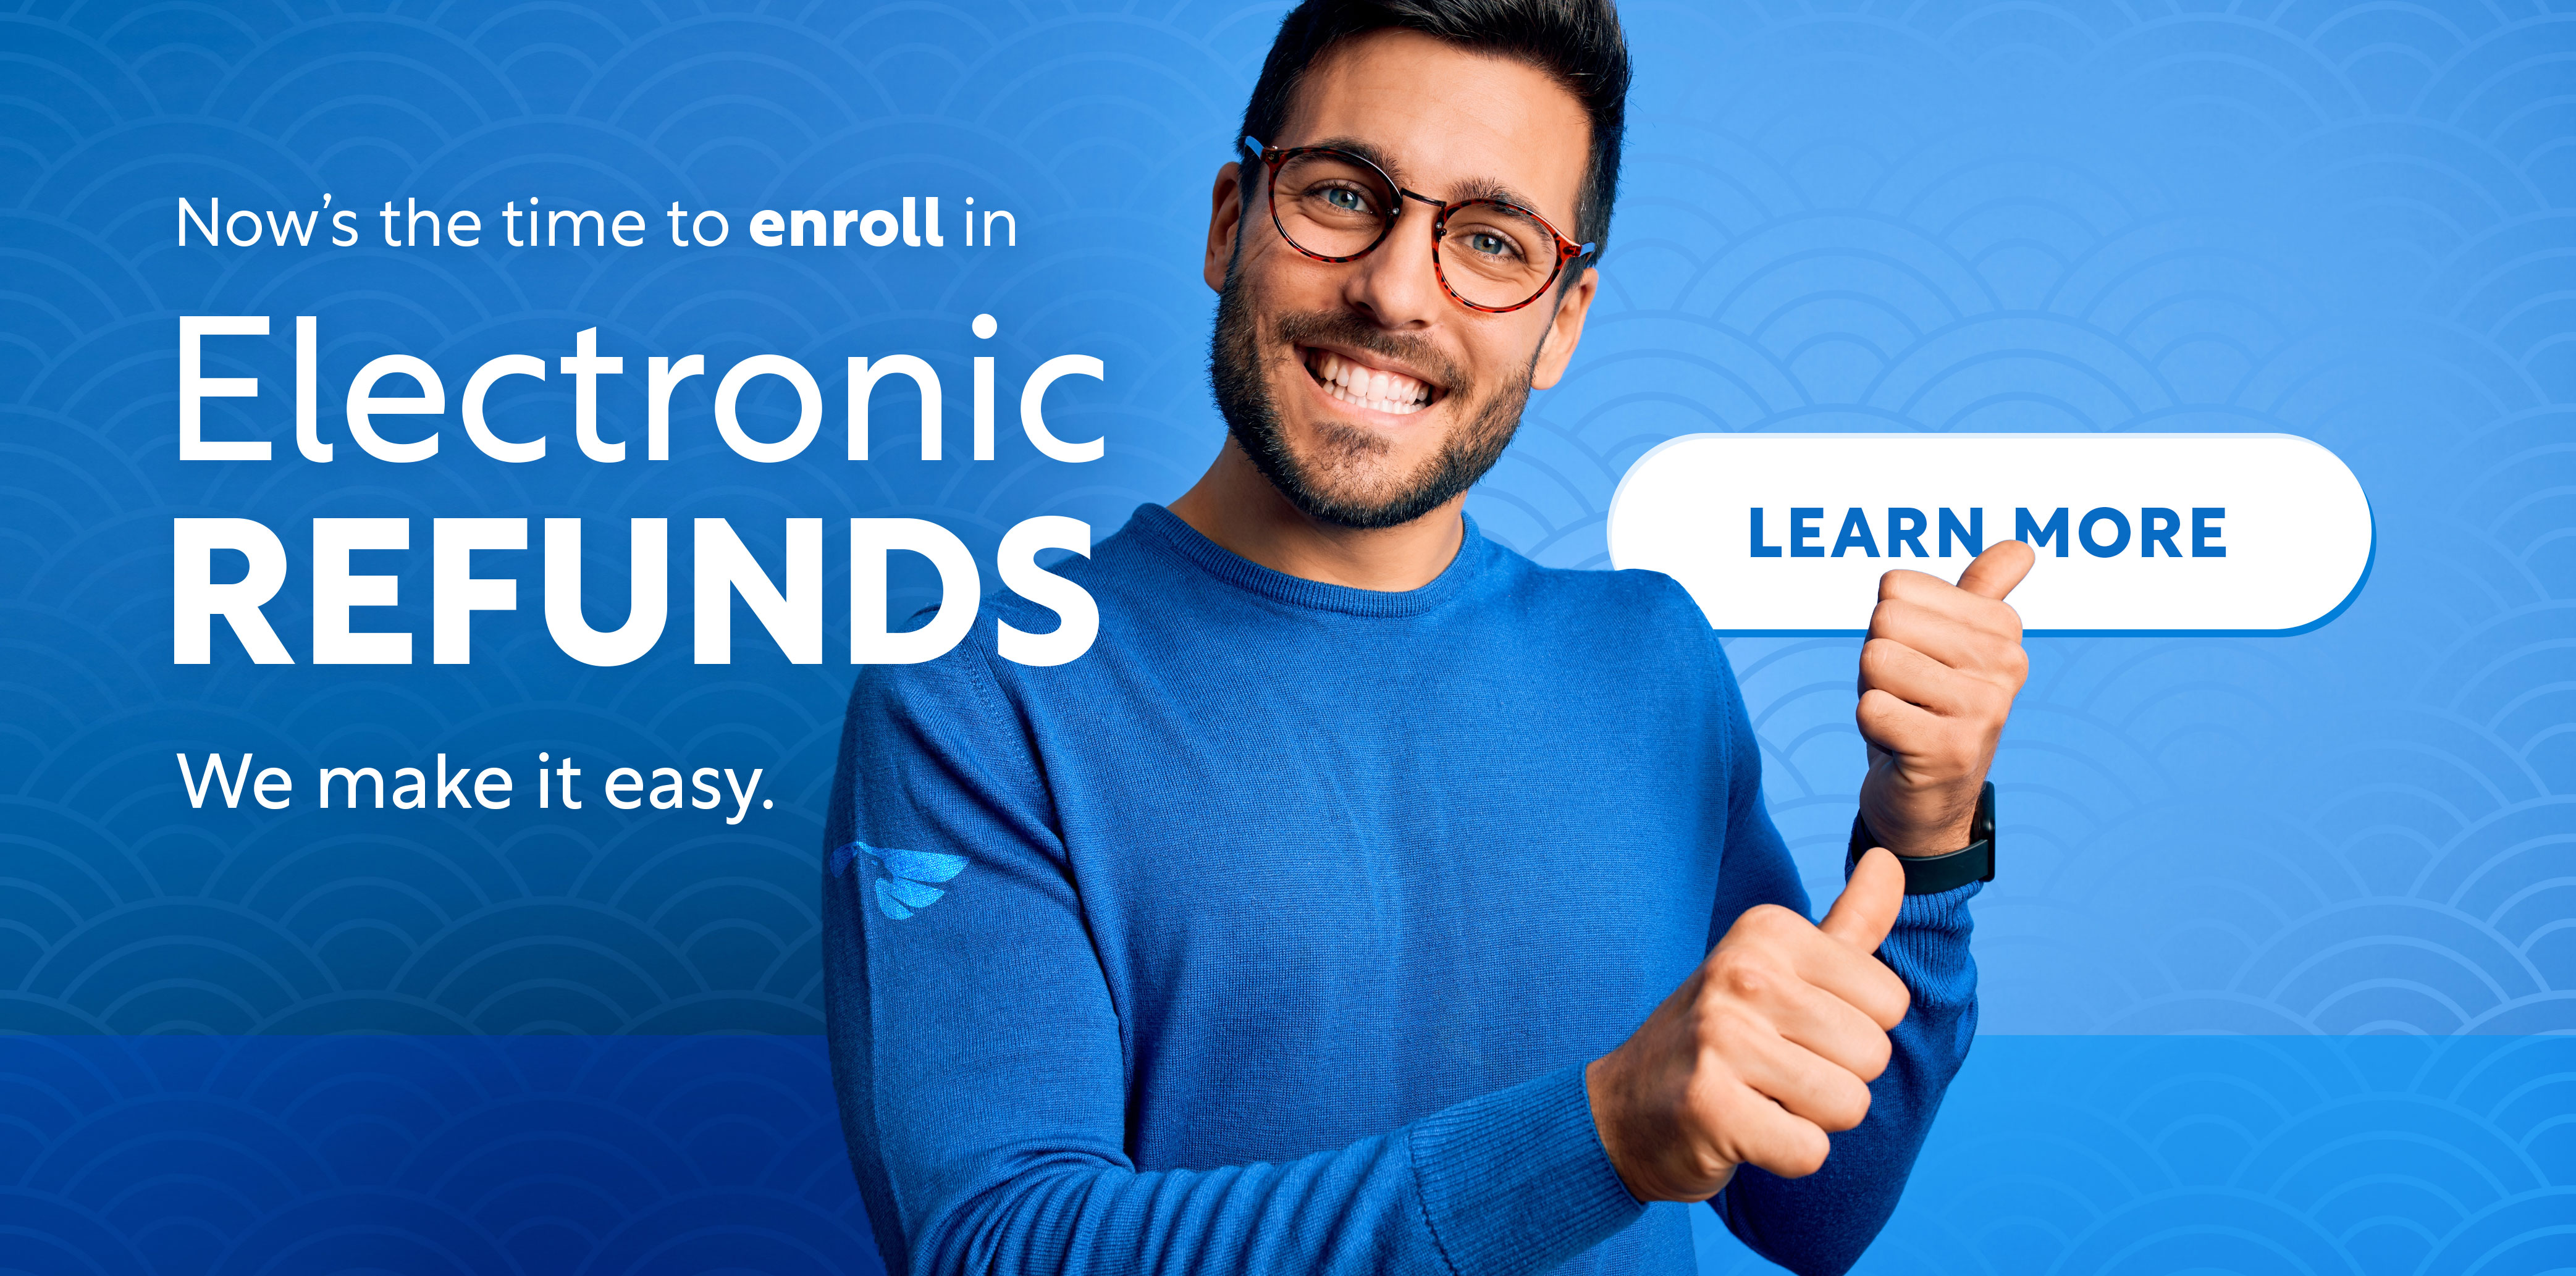 Enroll in electronic refunds 